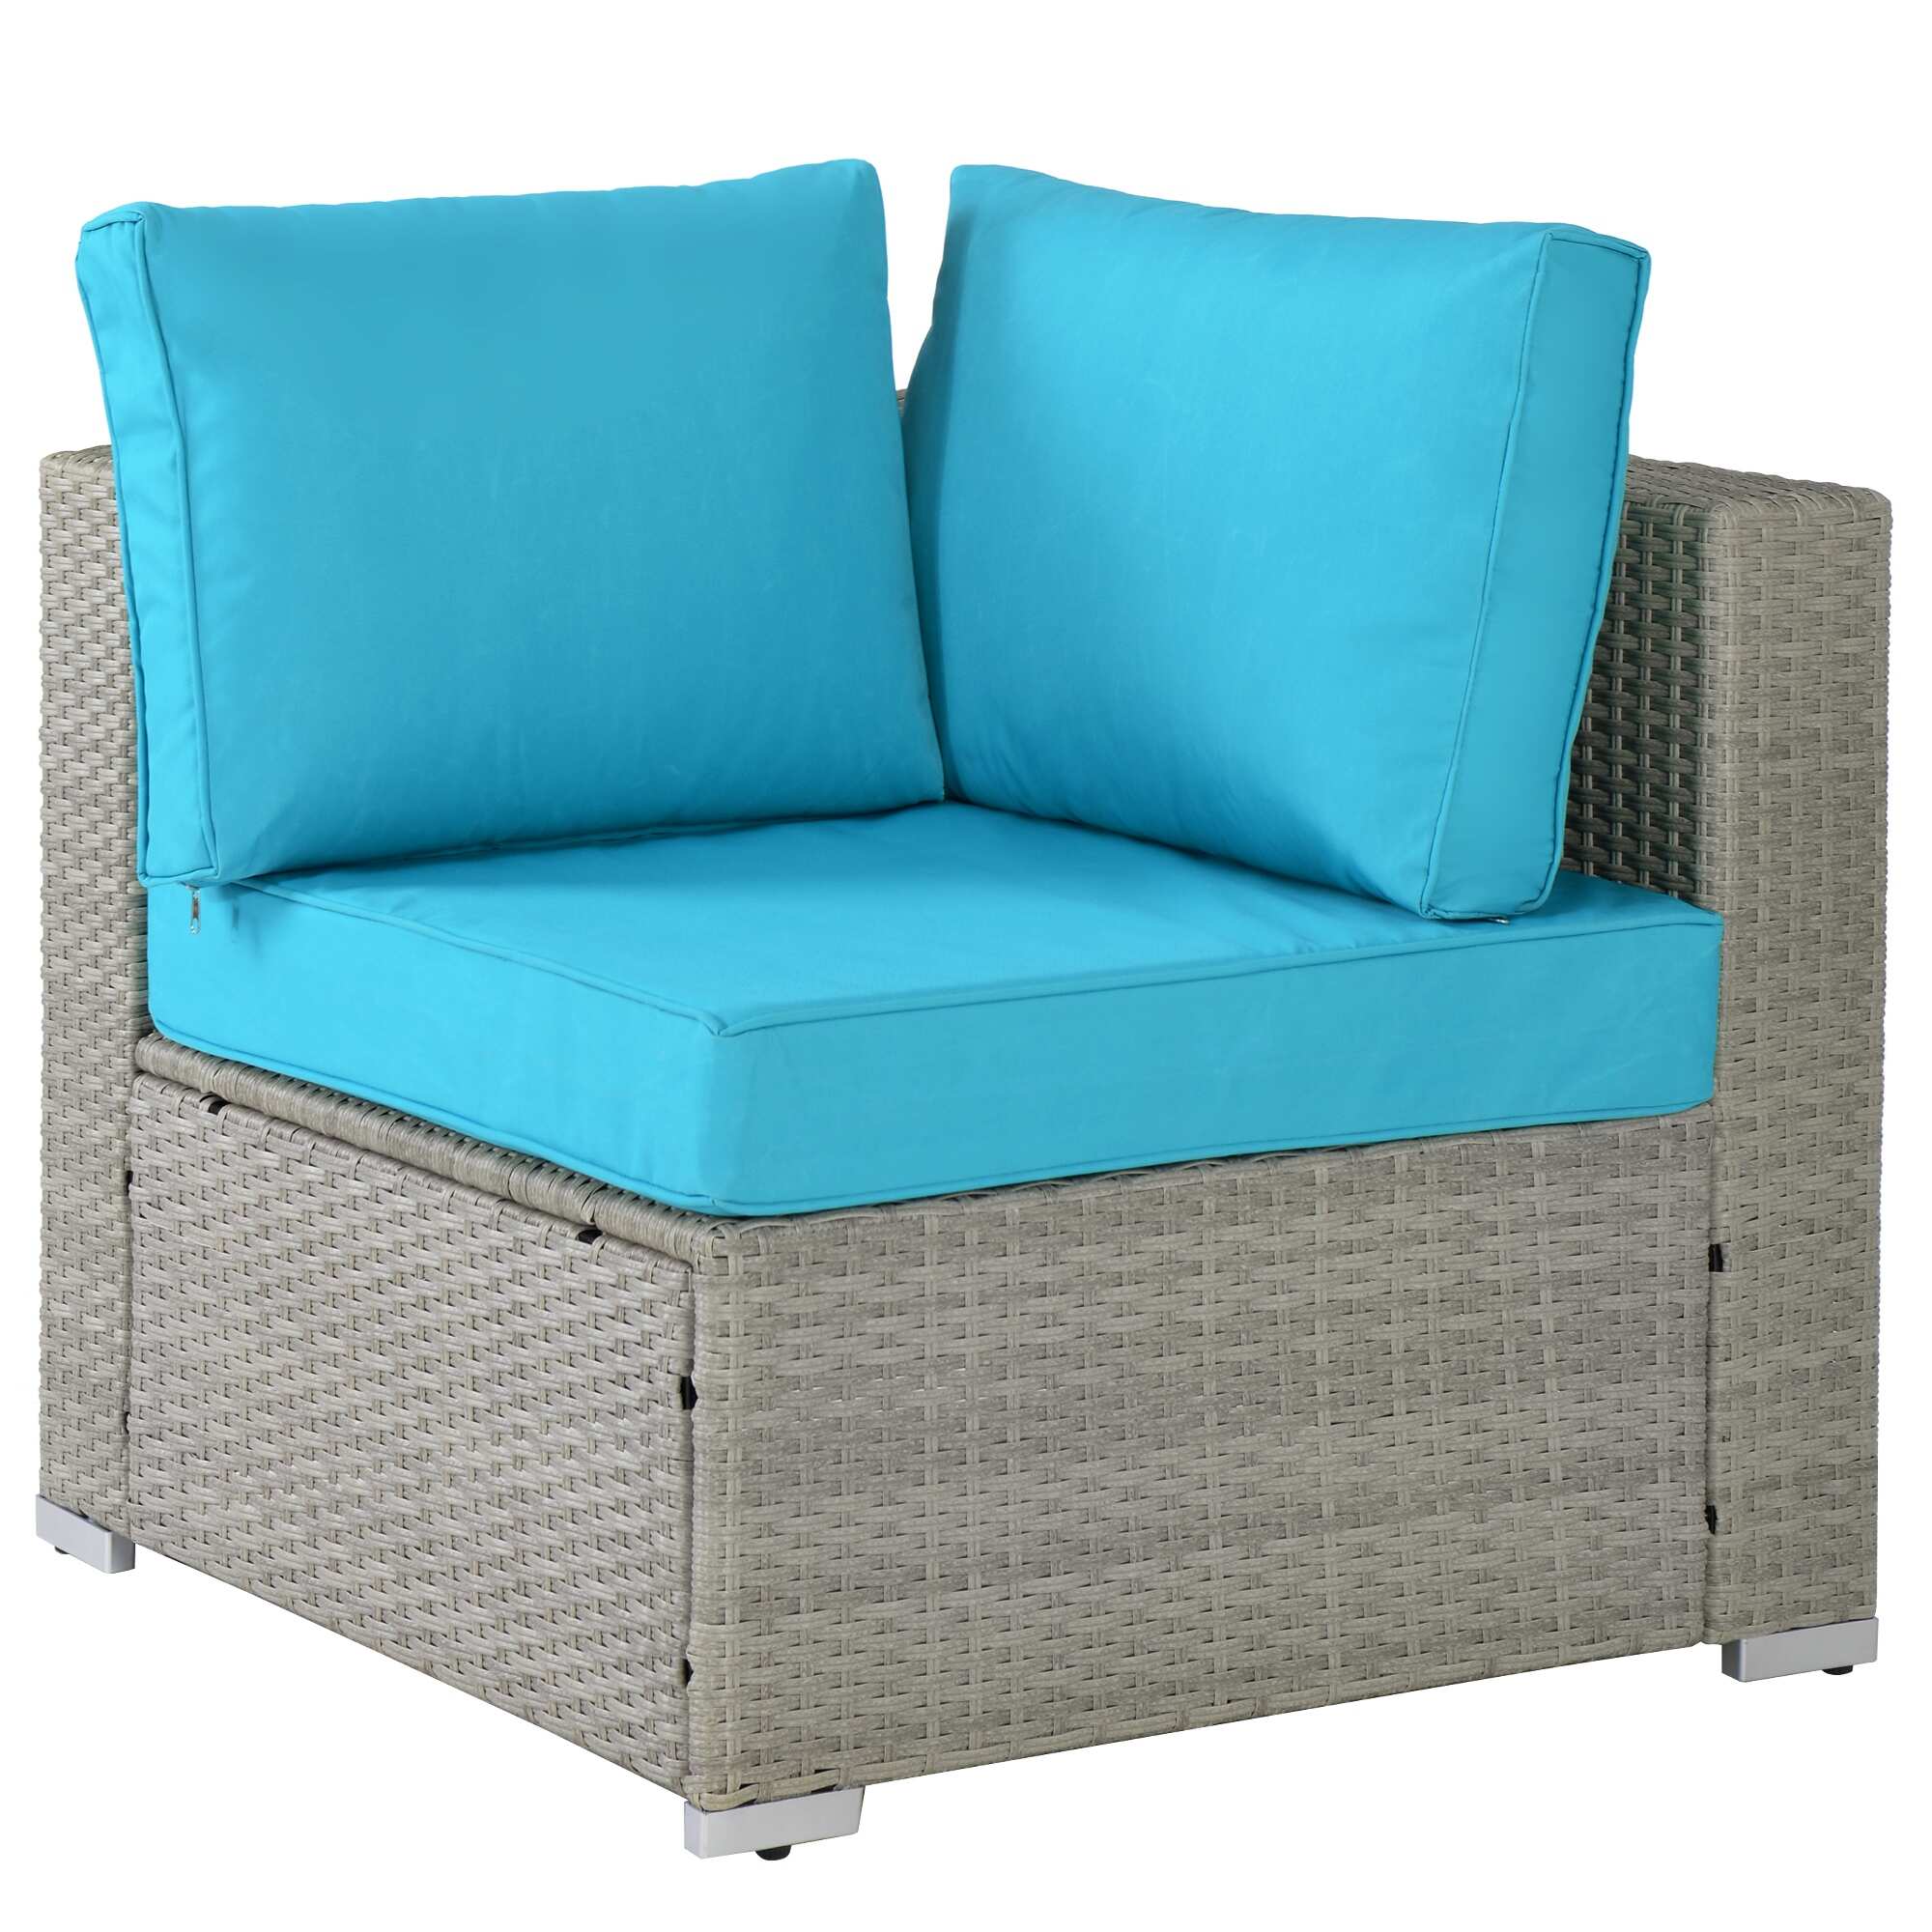 Outdoor Garden Patio Furniture Sofa Set with Cushions and Tempered Glass Countertop Table